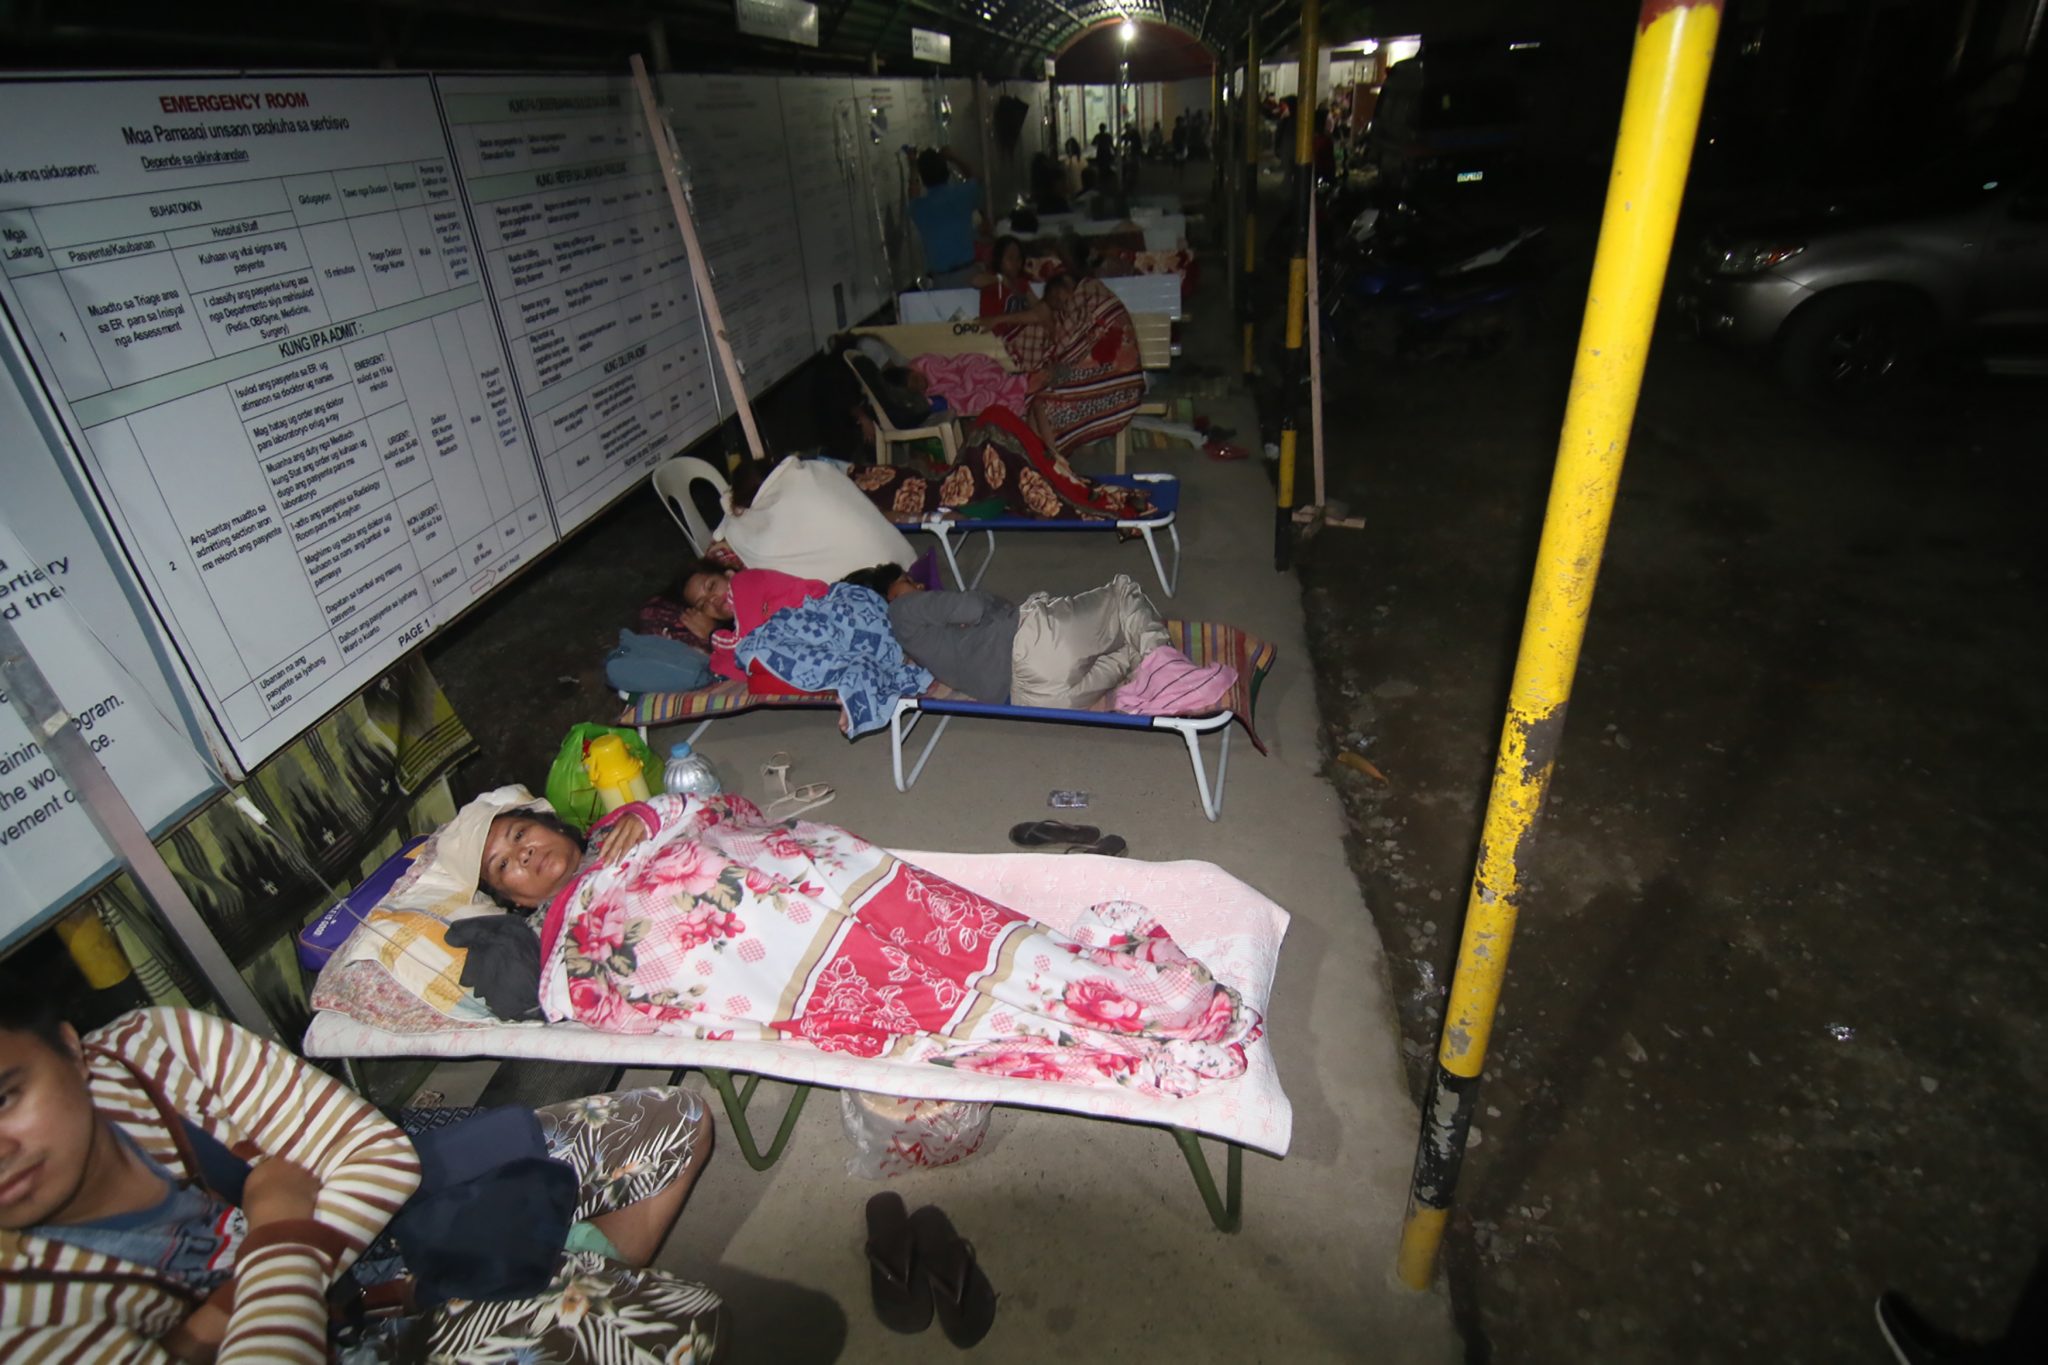 Hospital patients take shelter in a pedestrian-waiting shed for safety after a 6 .5-magnitude earthquake struck overnight in Surigao City, in southern island of Mindanao, February 11, 2017. A strong quake shook the southern Philippines on February 10, killing at least three people, toppling buildings and sending panicked residents fleeing their homes, media reports and authorities said. / AFP PHOTO / ERWIN MASCARINAS